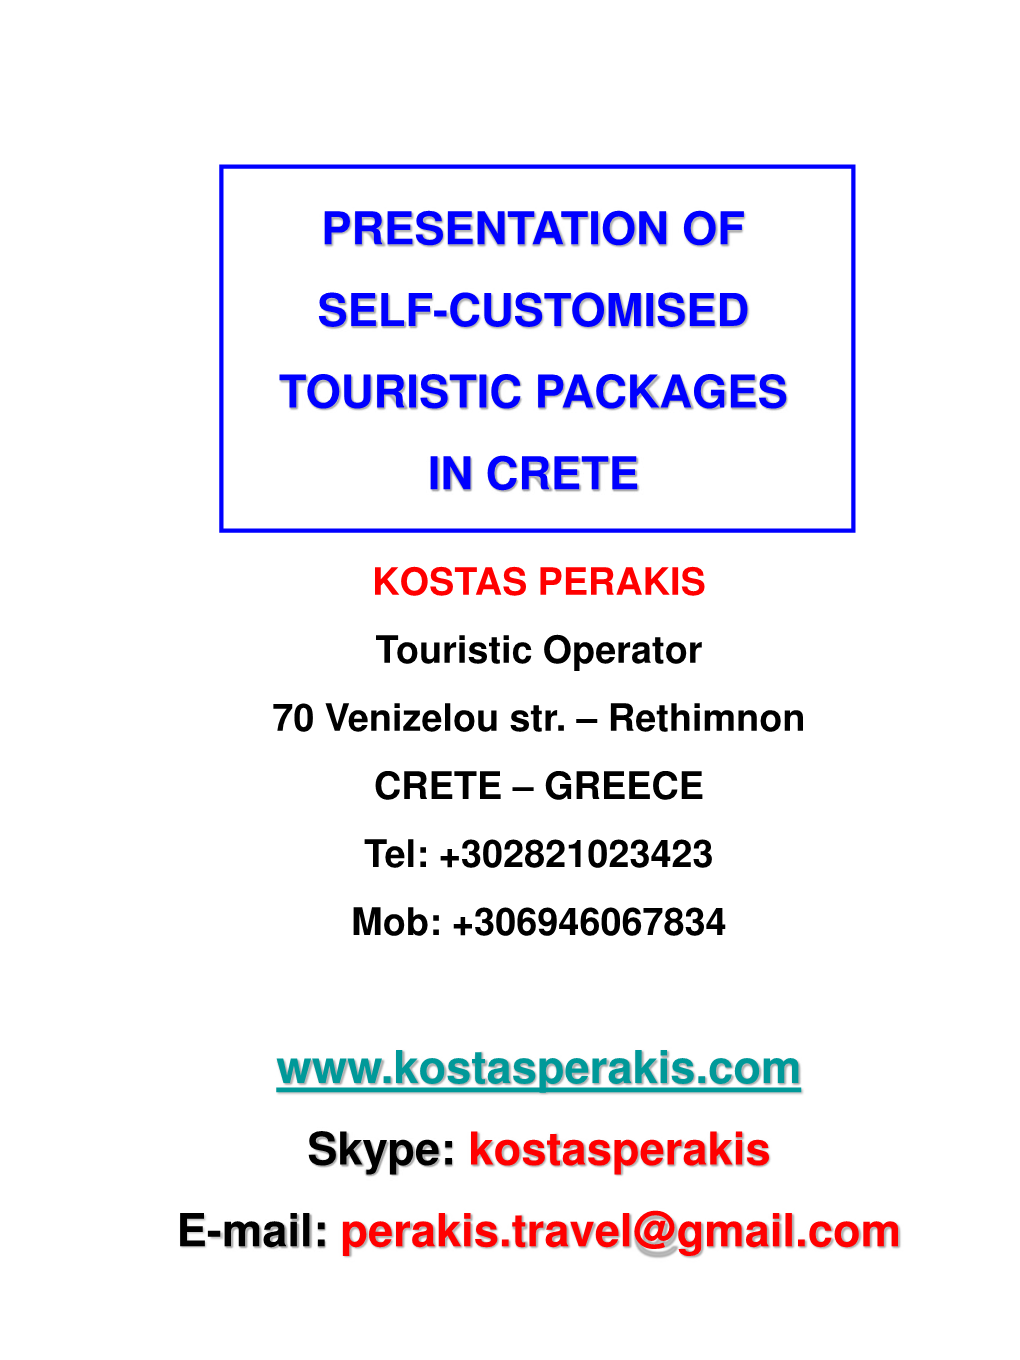 Presentation of Self-Customised Touristic Packages in Crete